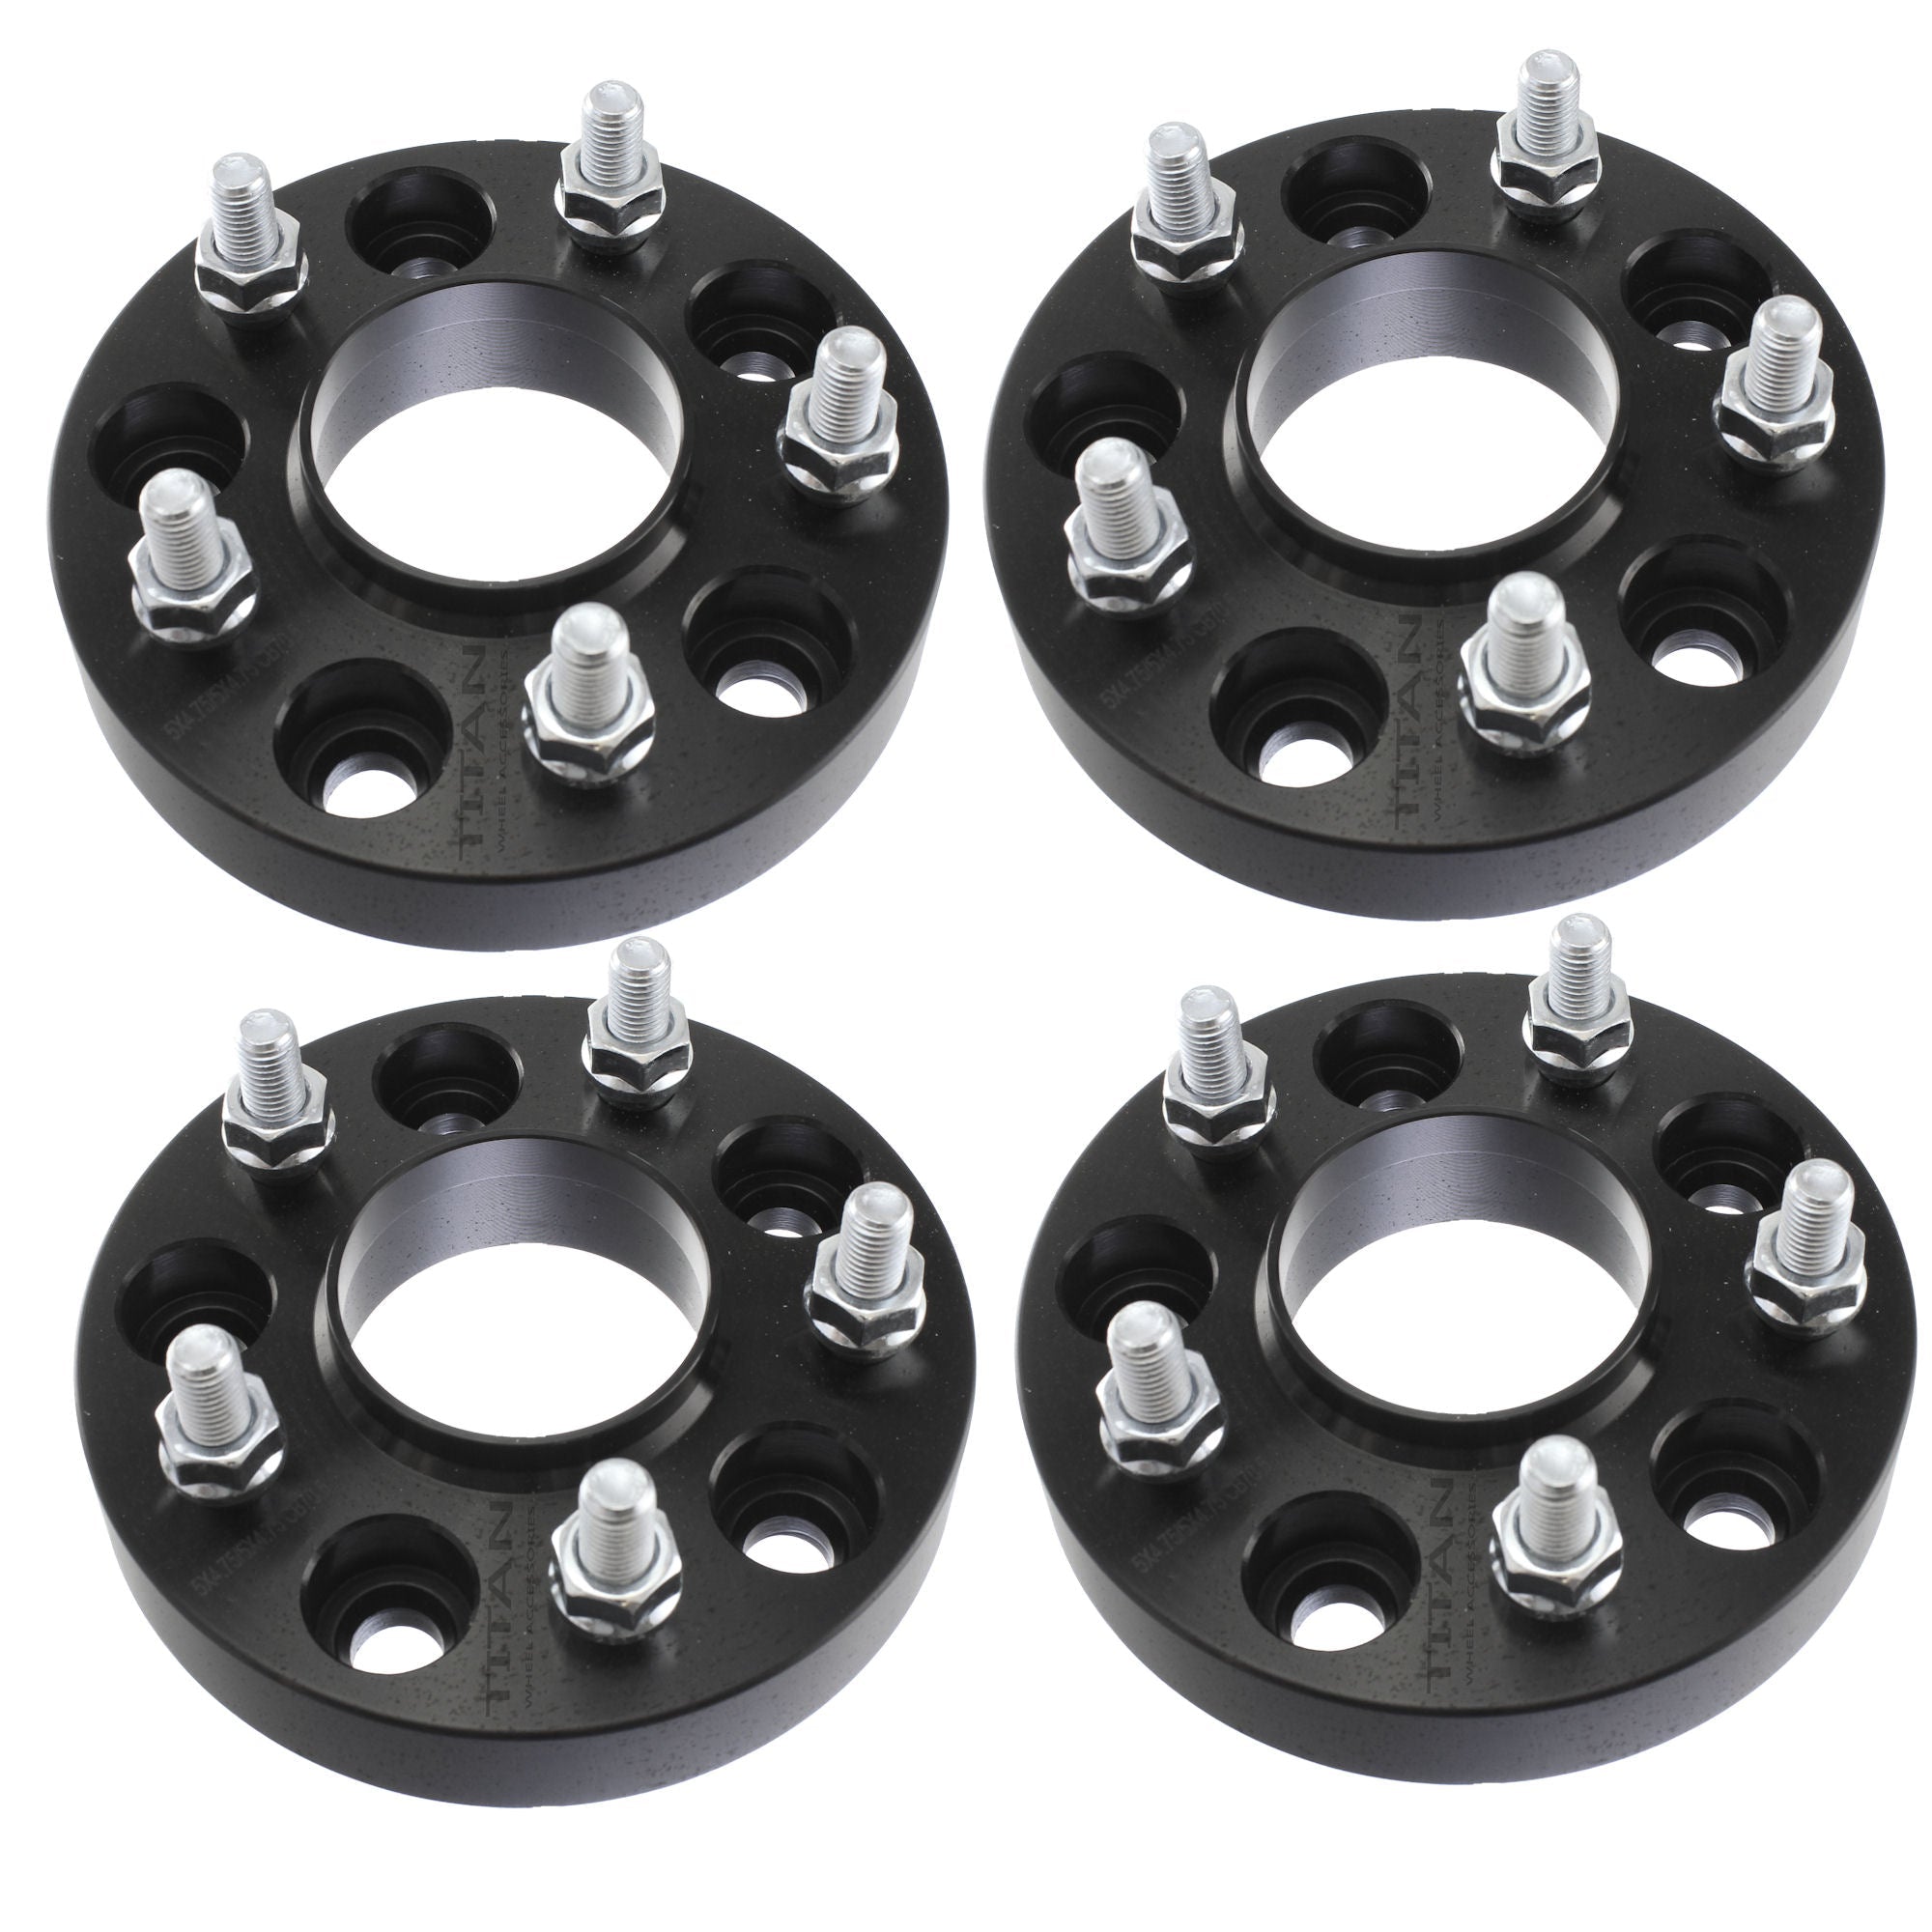 Wheel Spacers 101  What you need to know 